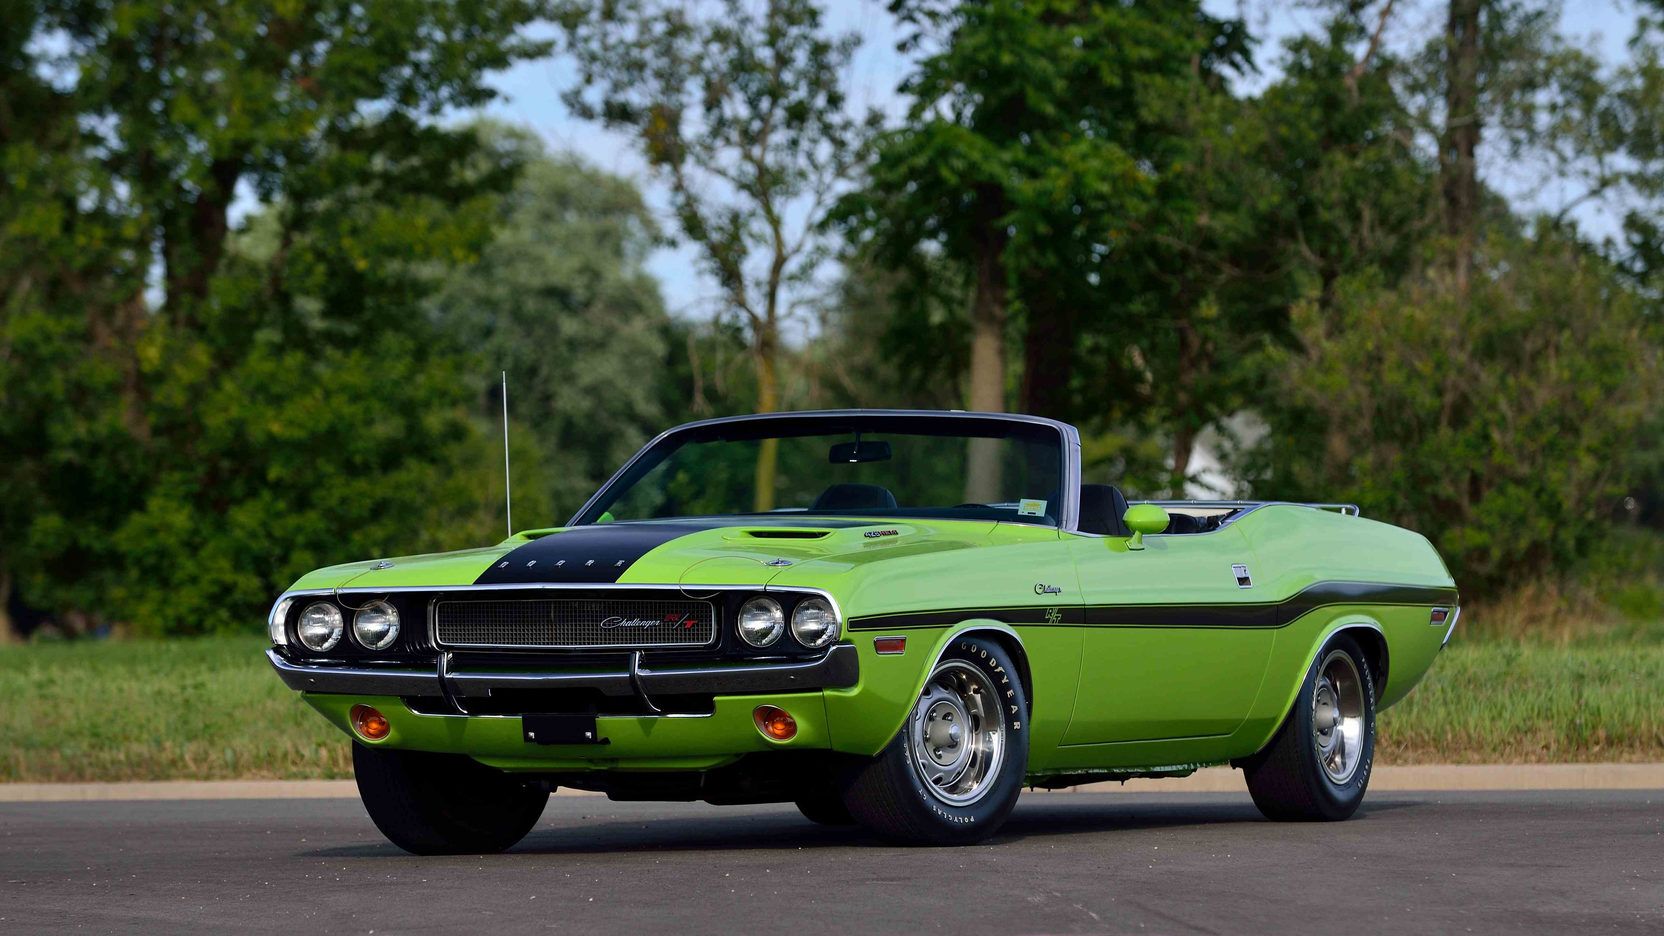 1970 Dodge Challenger R/T Convertible parked on the road